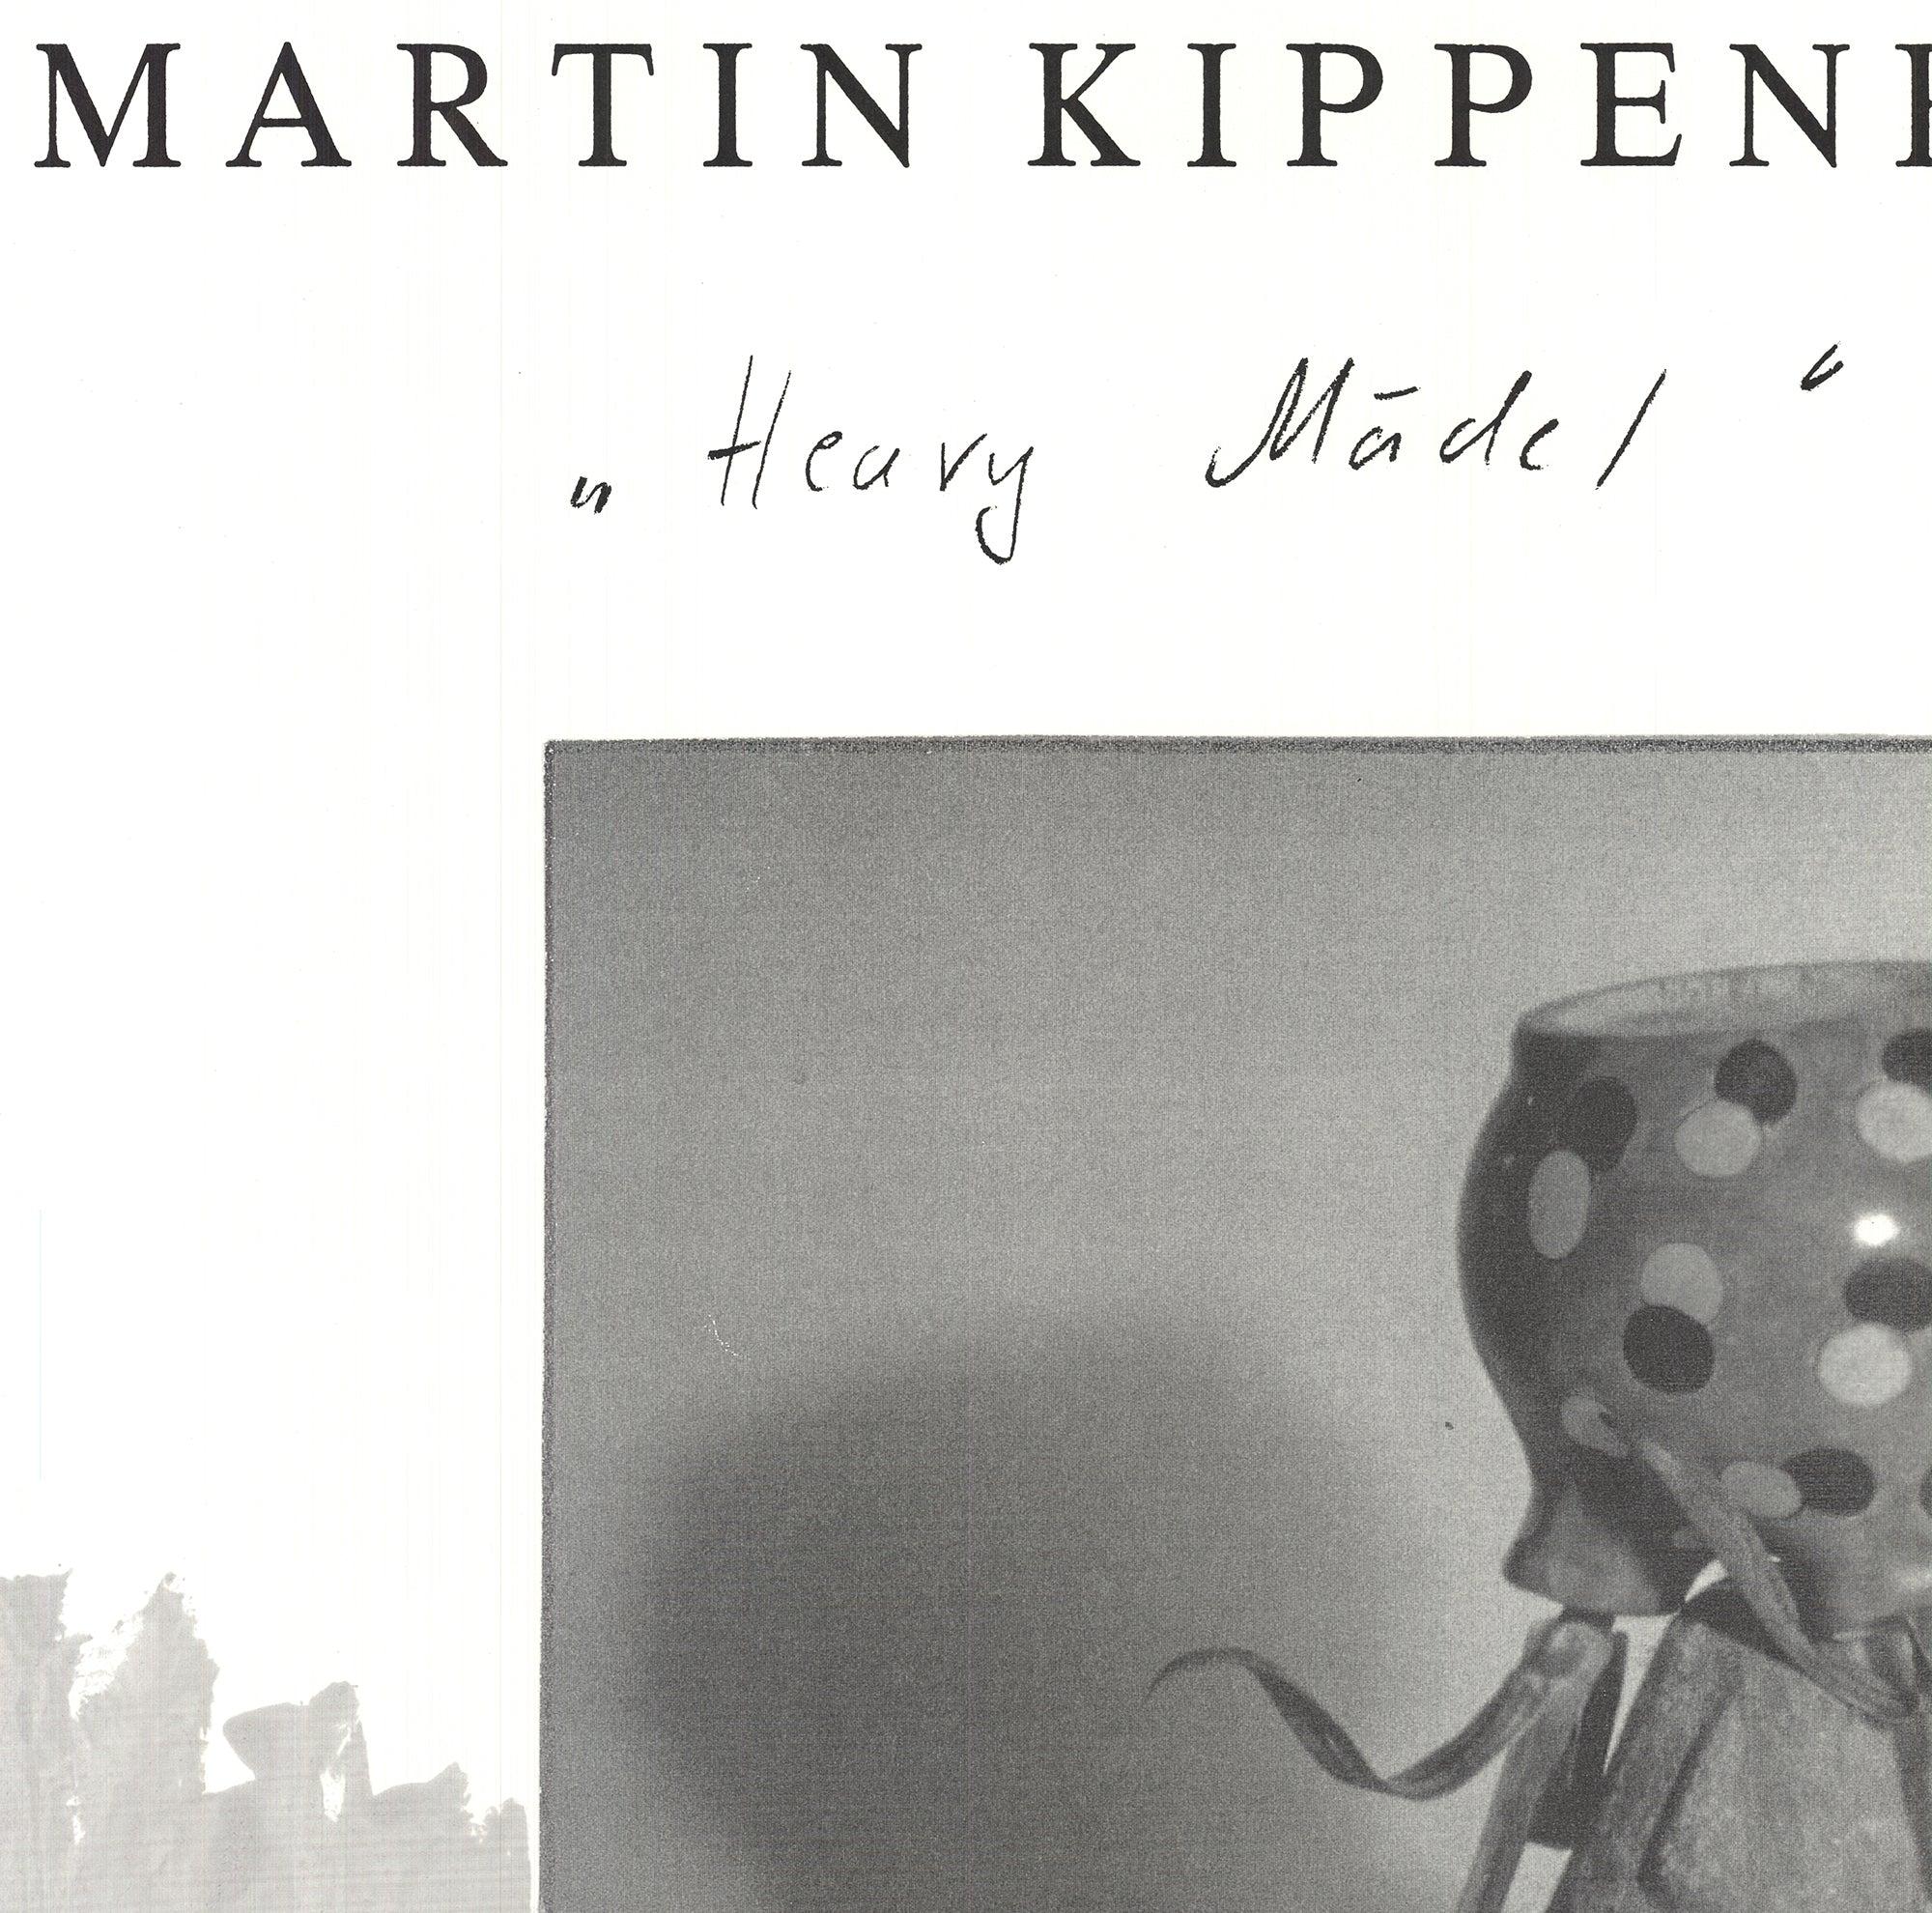 1991 Martin Kippenberger 'Pace/ Macgill' Contemporary Black & White Offset Litho For Sale 1